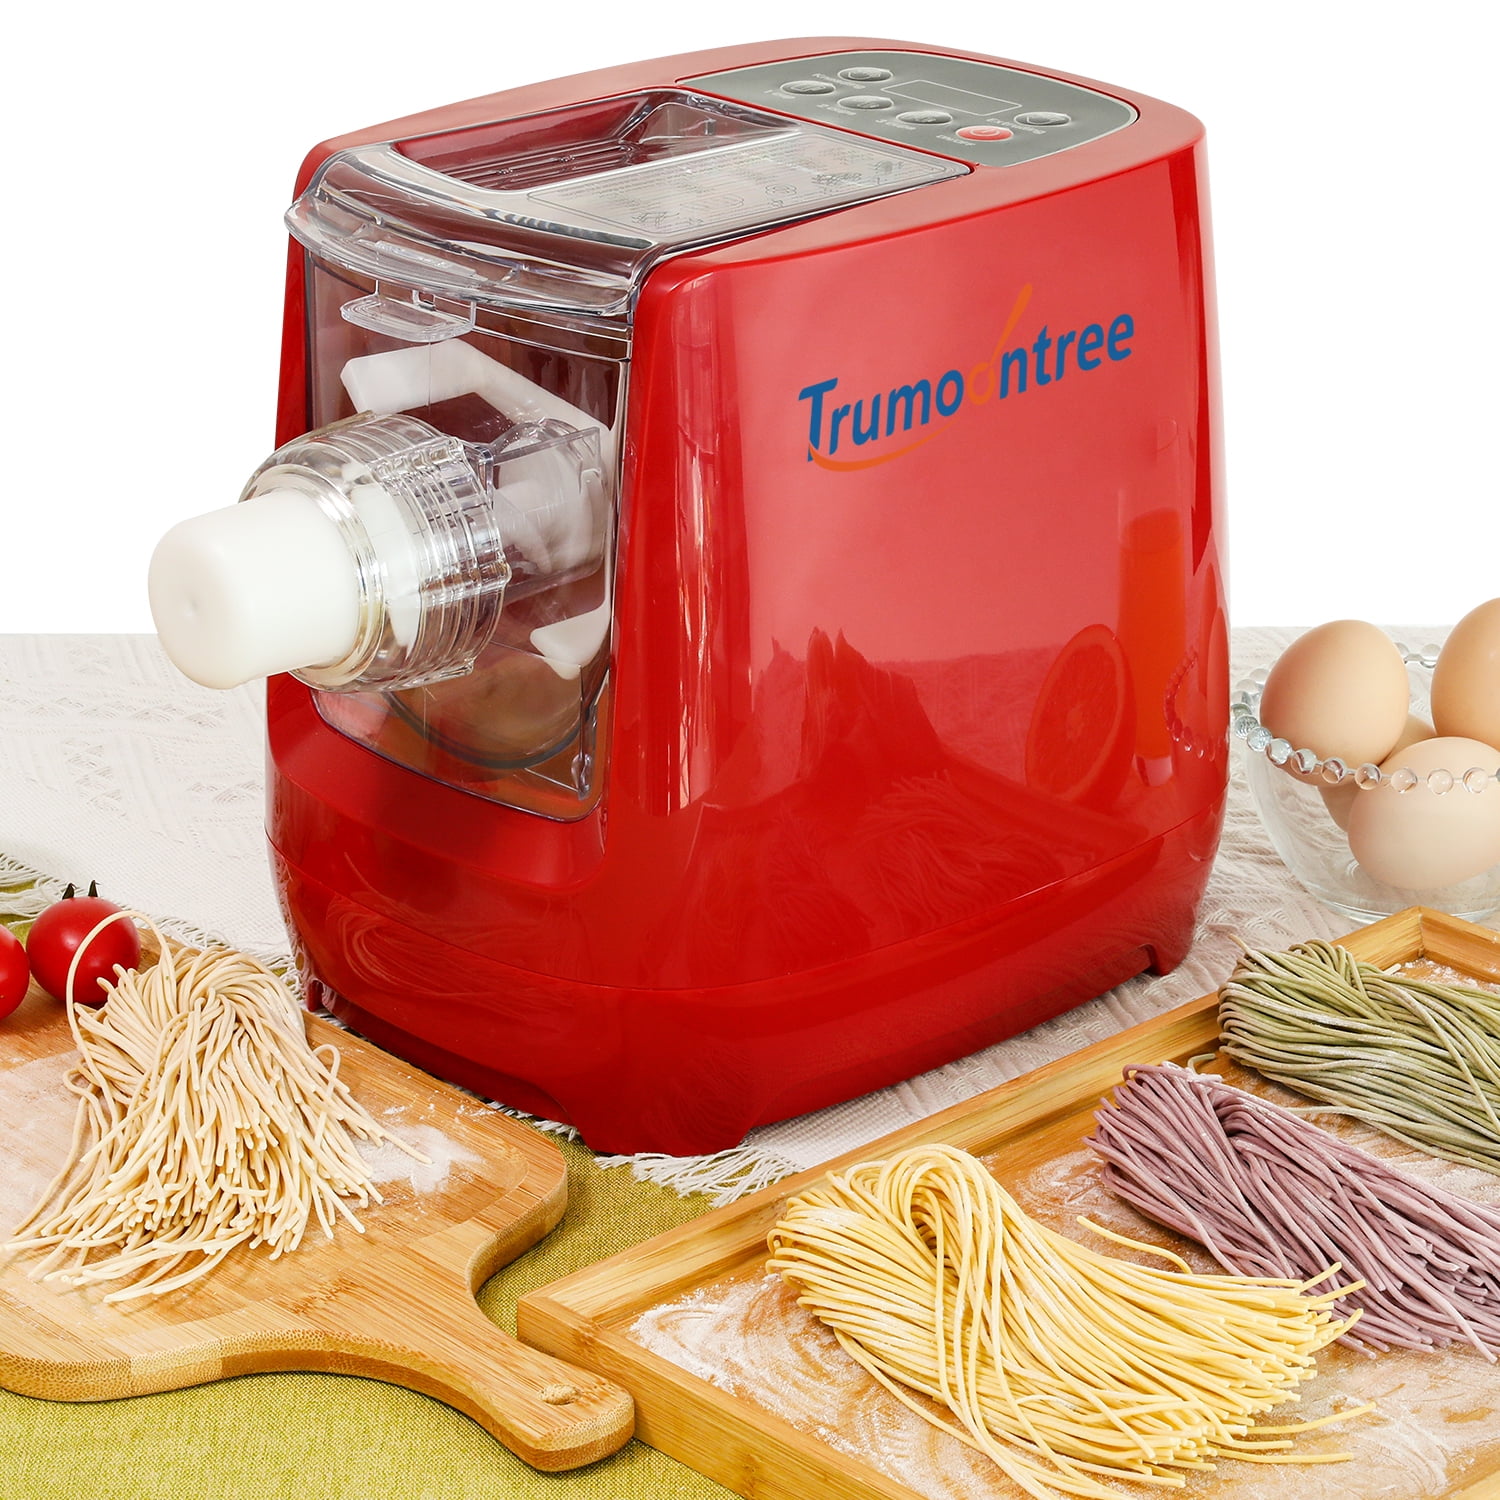 How to Choose the Best Pasta Maker